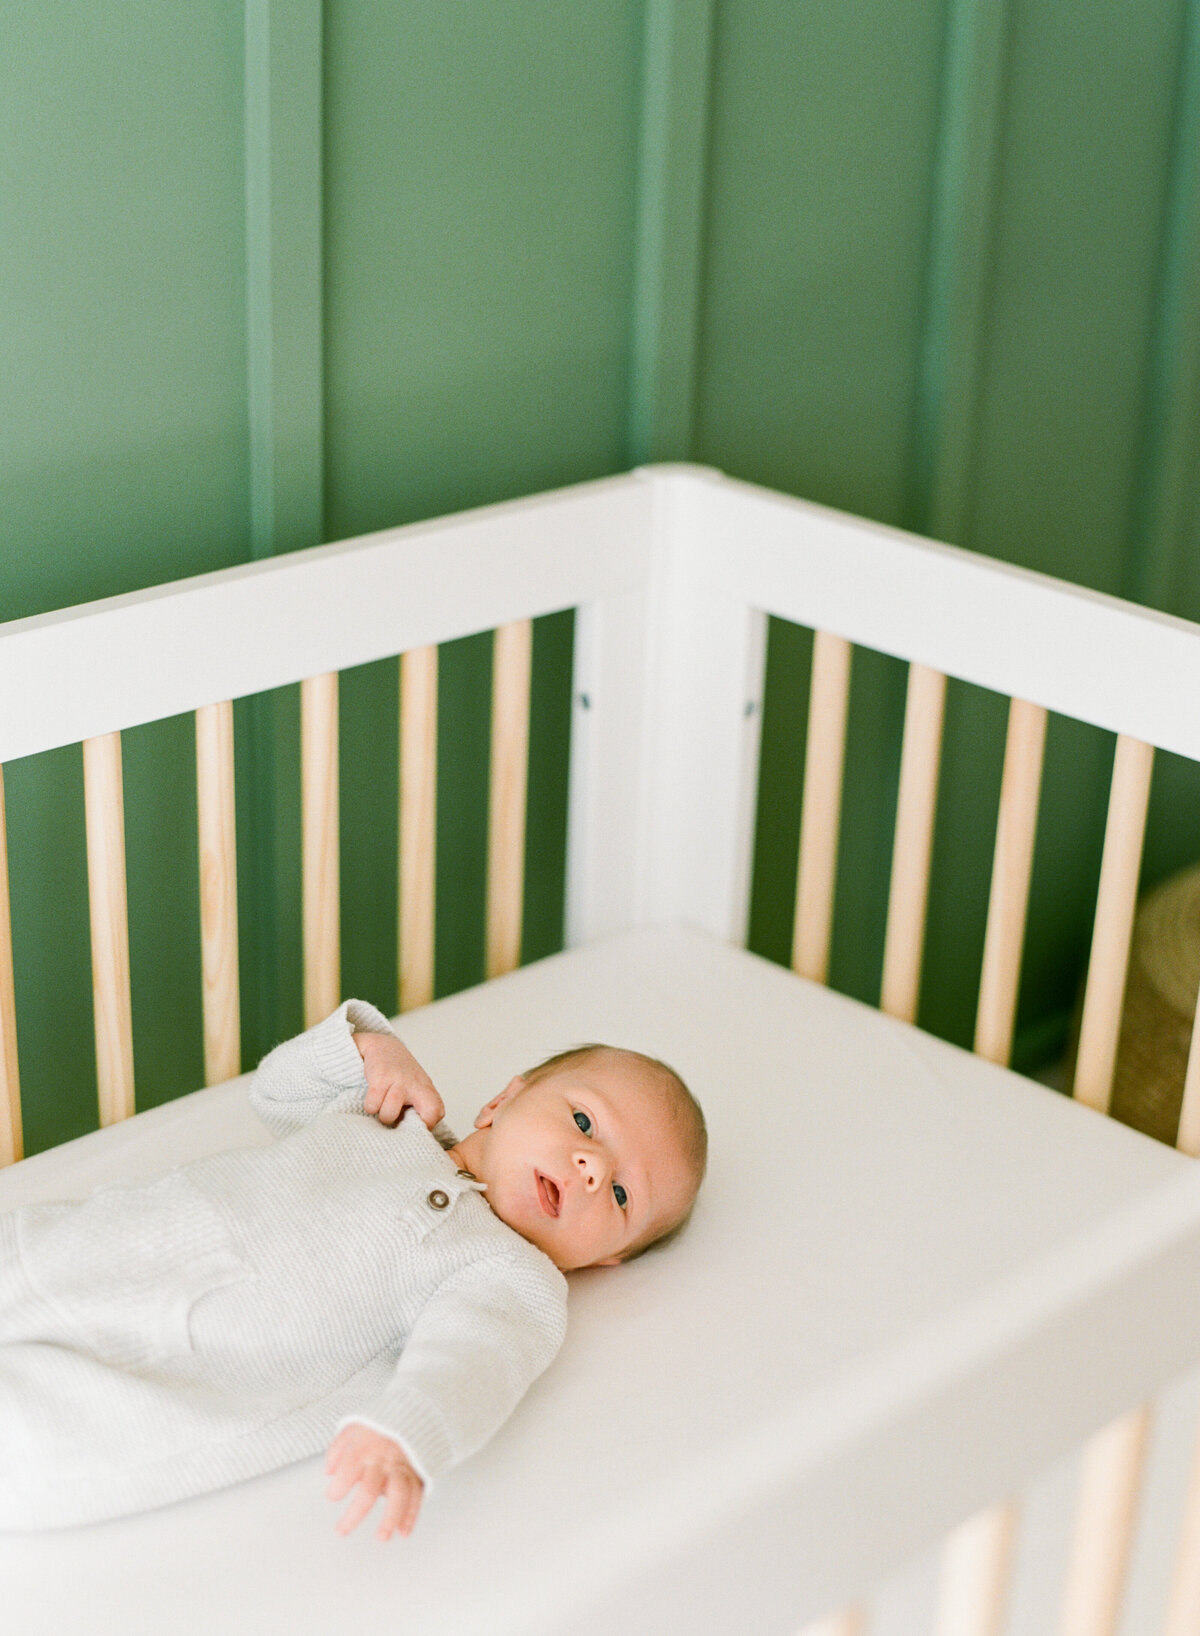 Baby lays in a crib wide awake during a newborn photography session in Raleigh. Photo by Raleigh Newborn Photography A.J. Dunlap Photography.